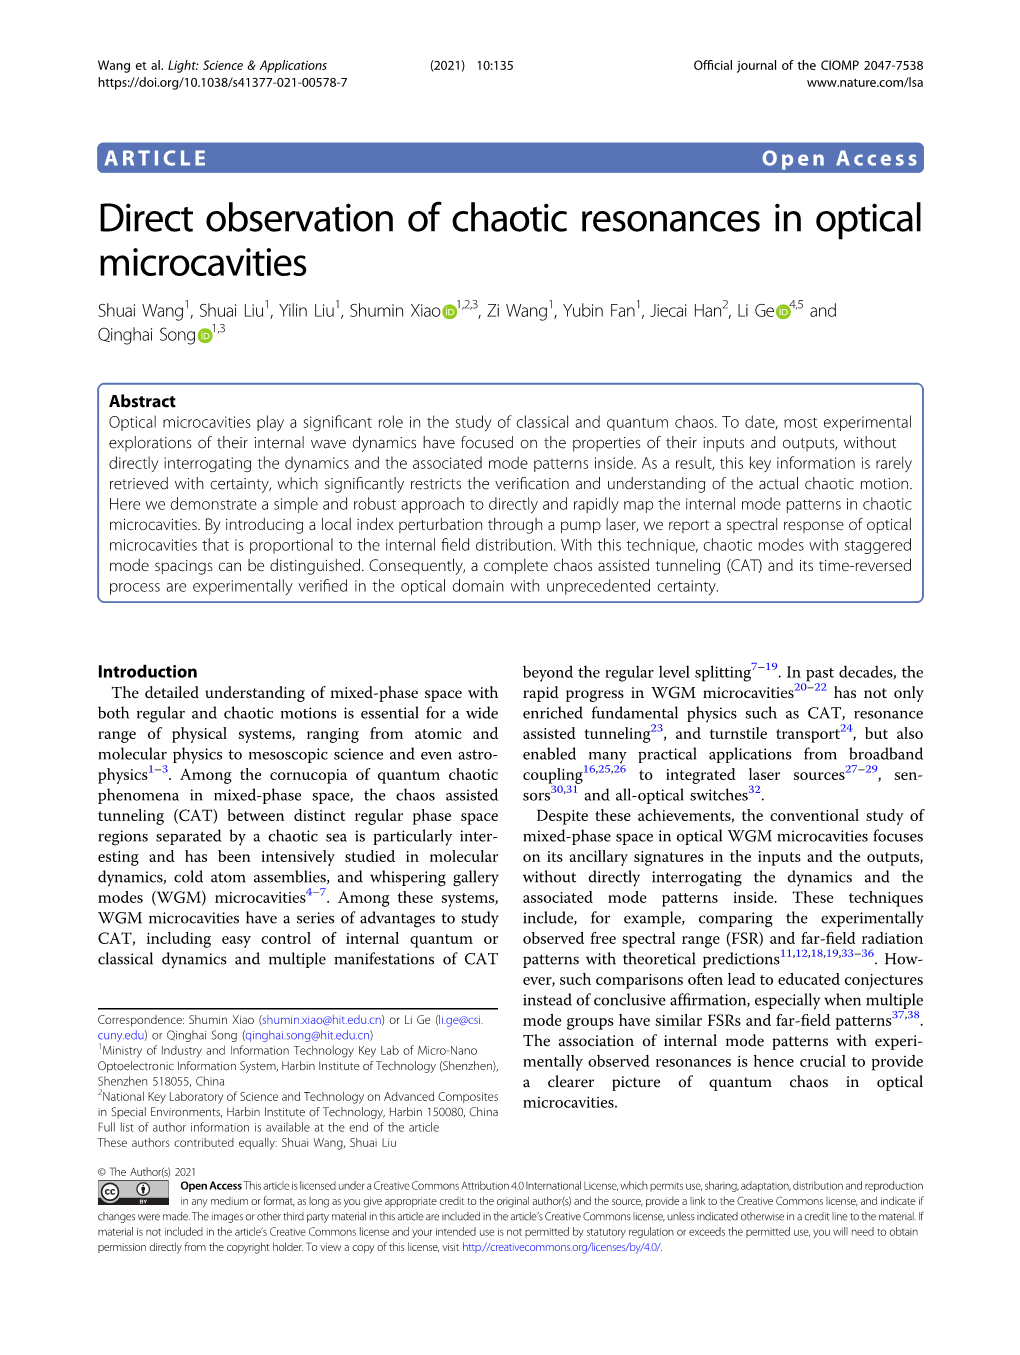 Direct Observation of Chaotic Resonances in Optical Microcavities